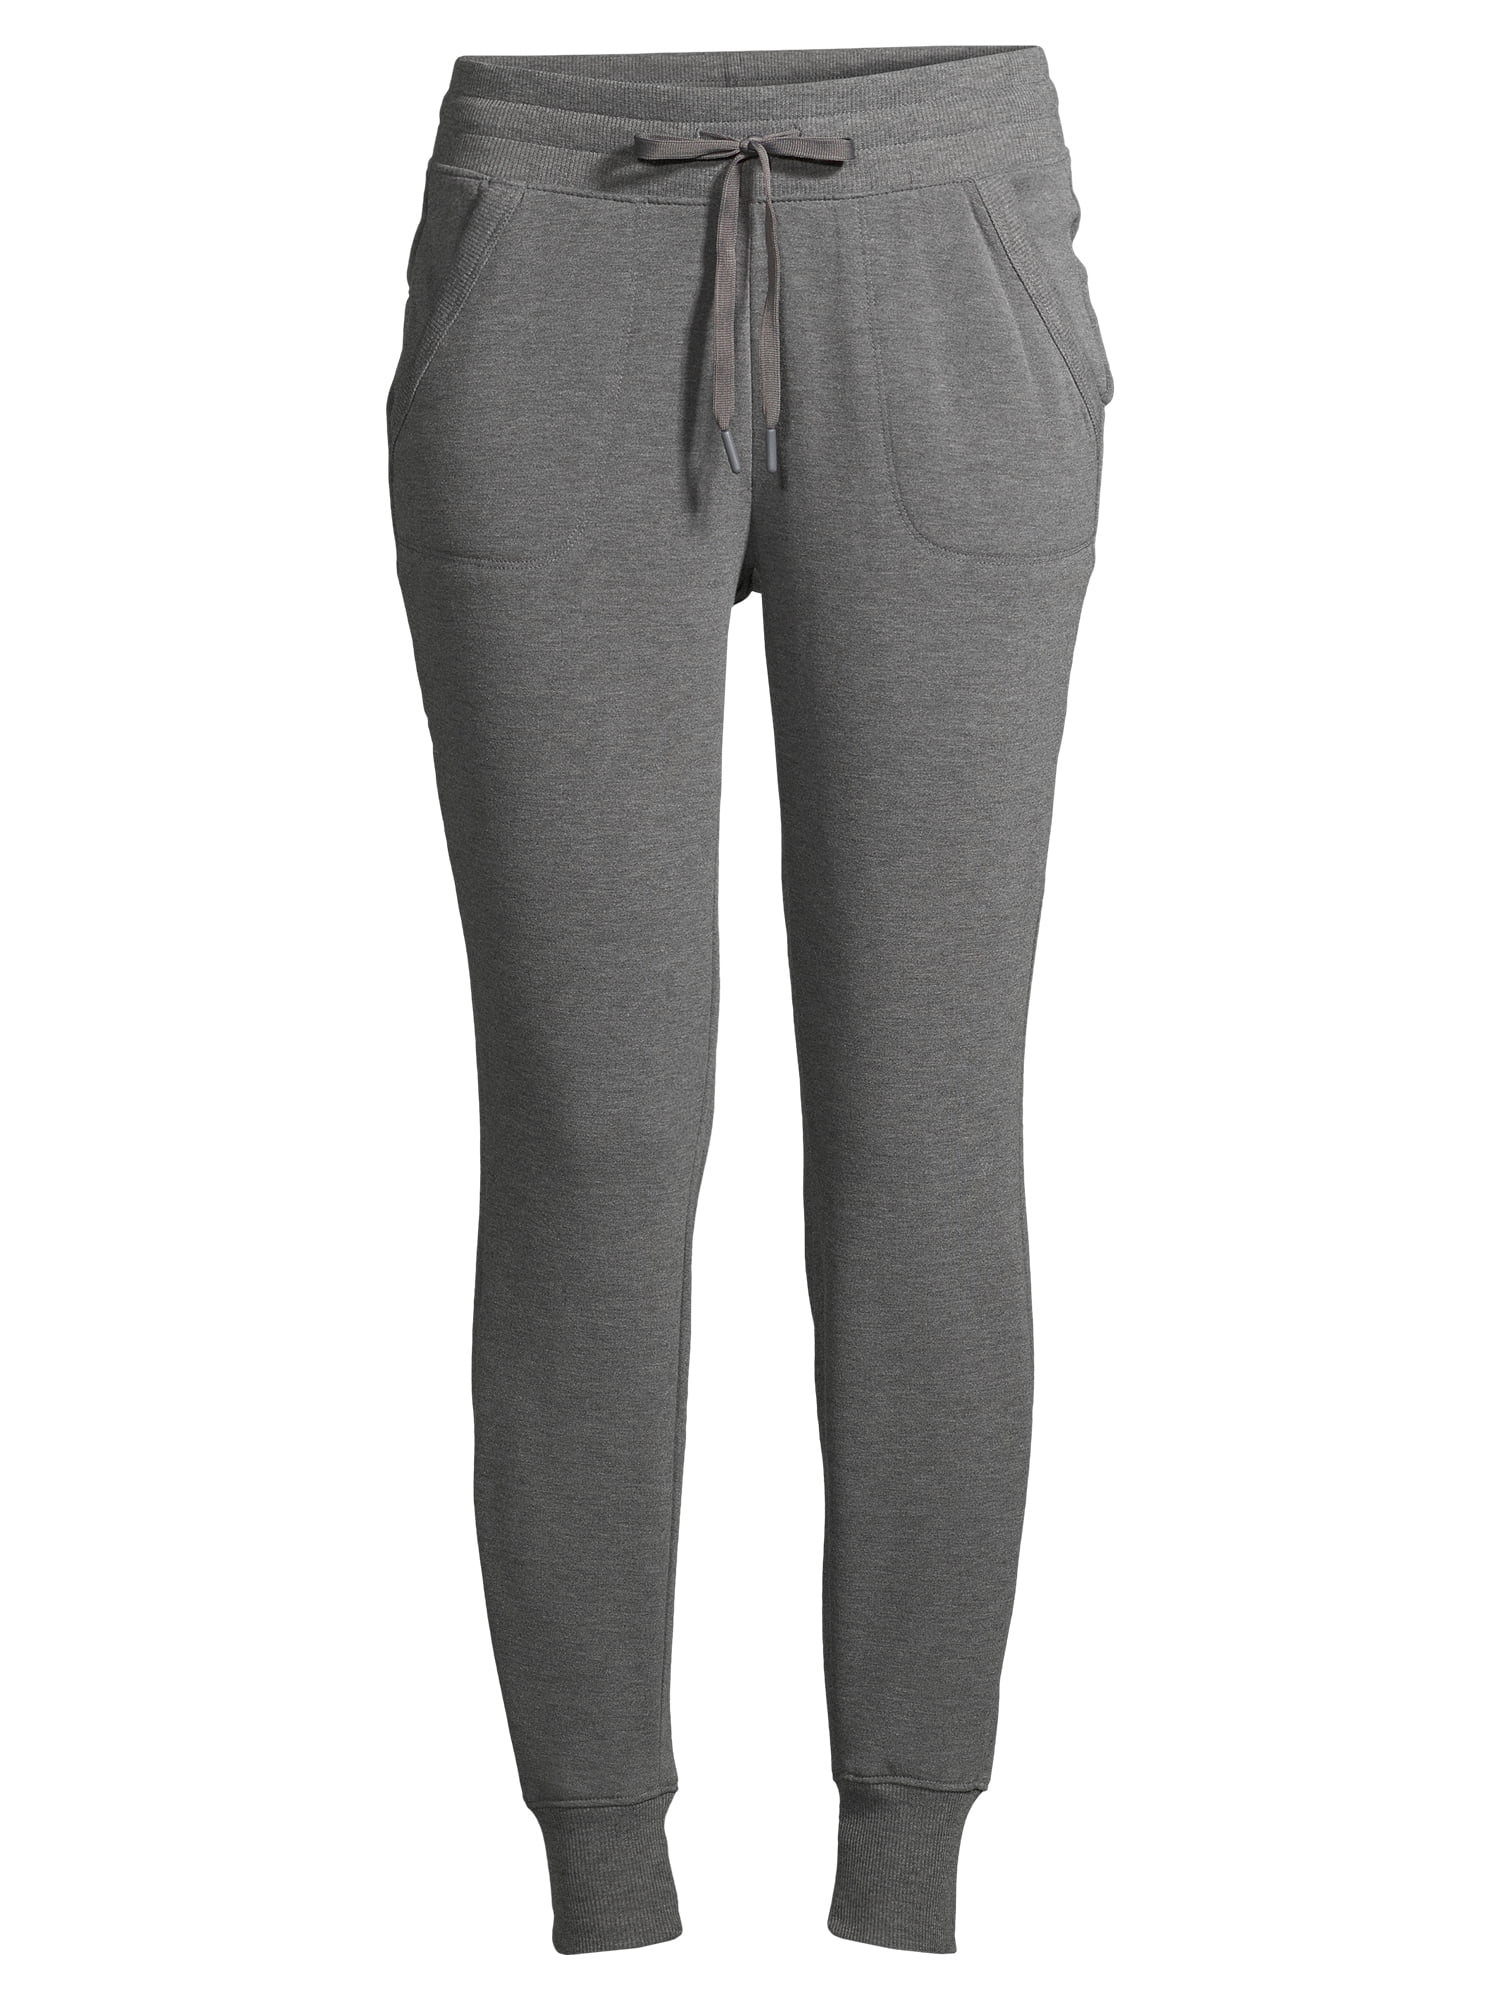 Athletic Works Women's Athleisure Soft Jogger Pants 